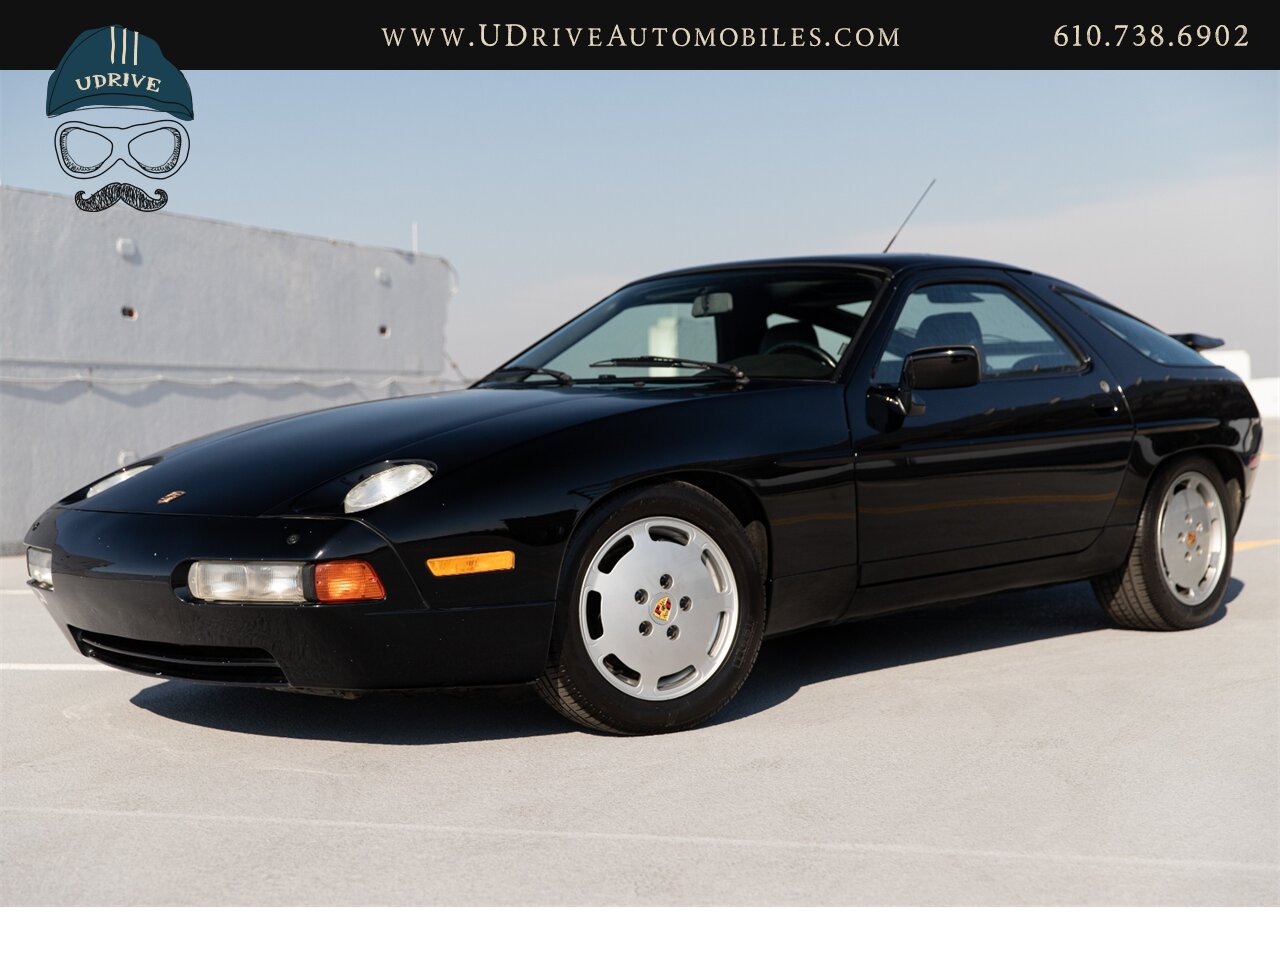 1990 Porsche 928 S4 $58k in Service History Since 2014   - Photo 1 - West Chester, PA 19382